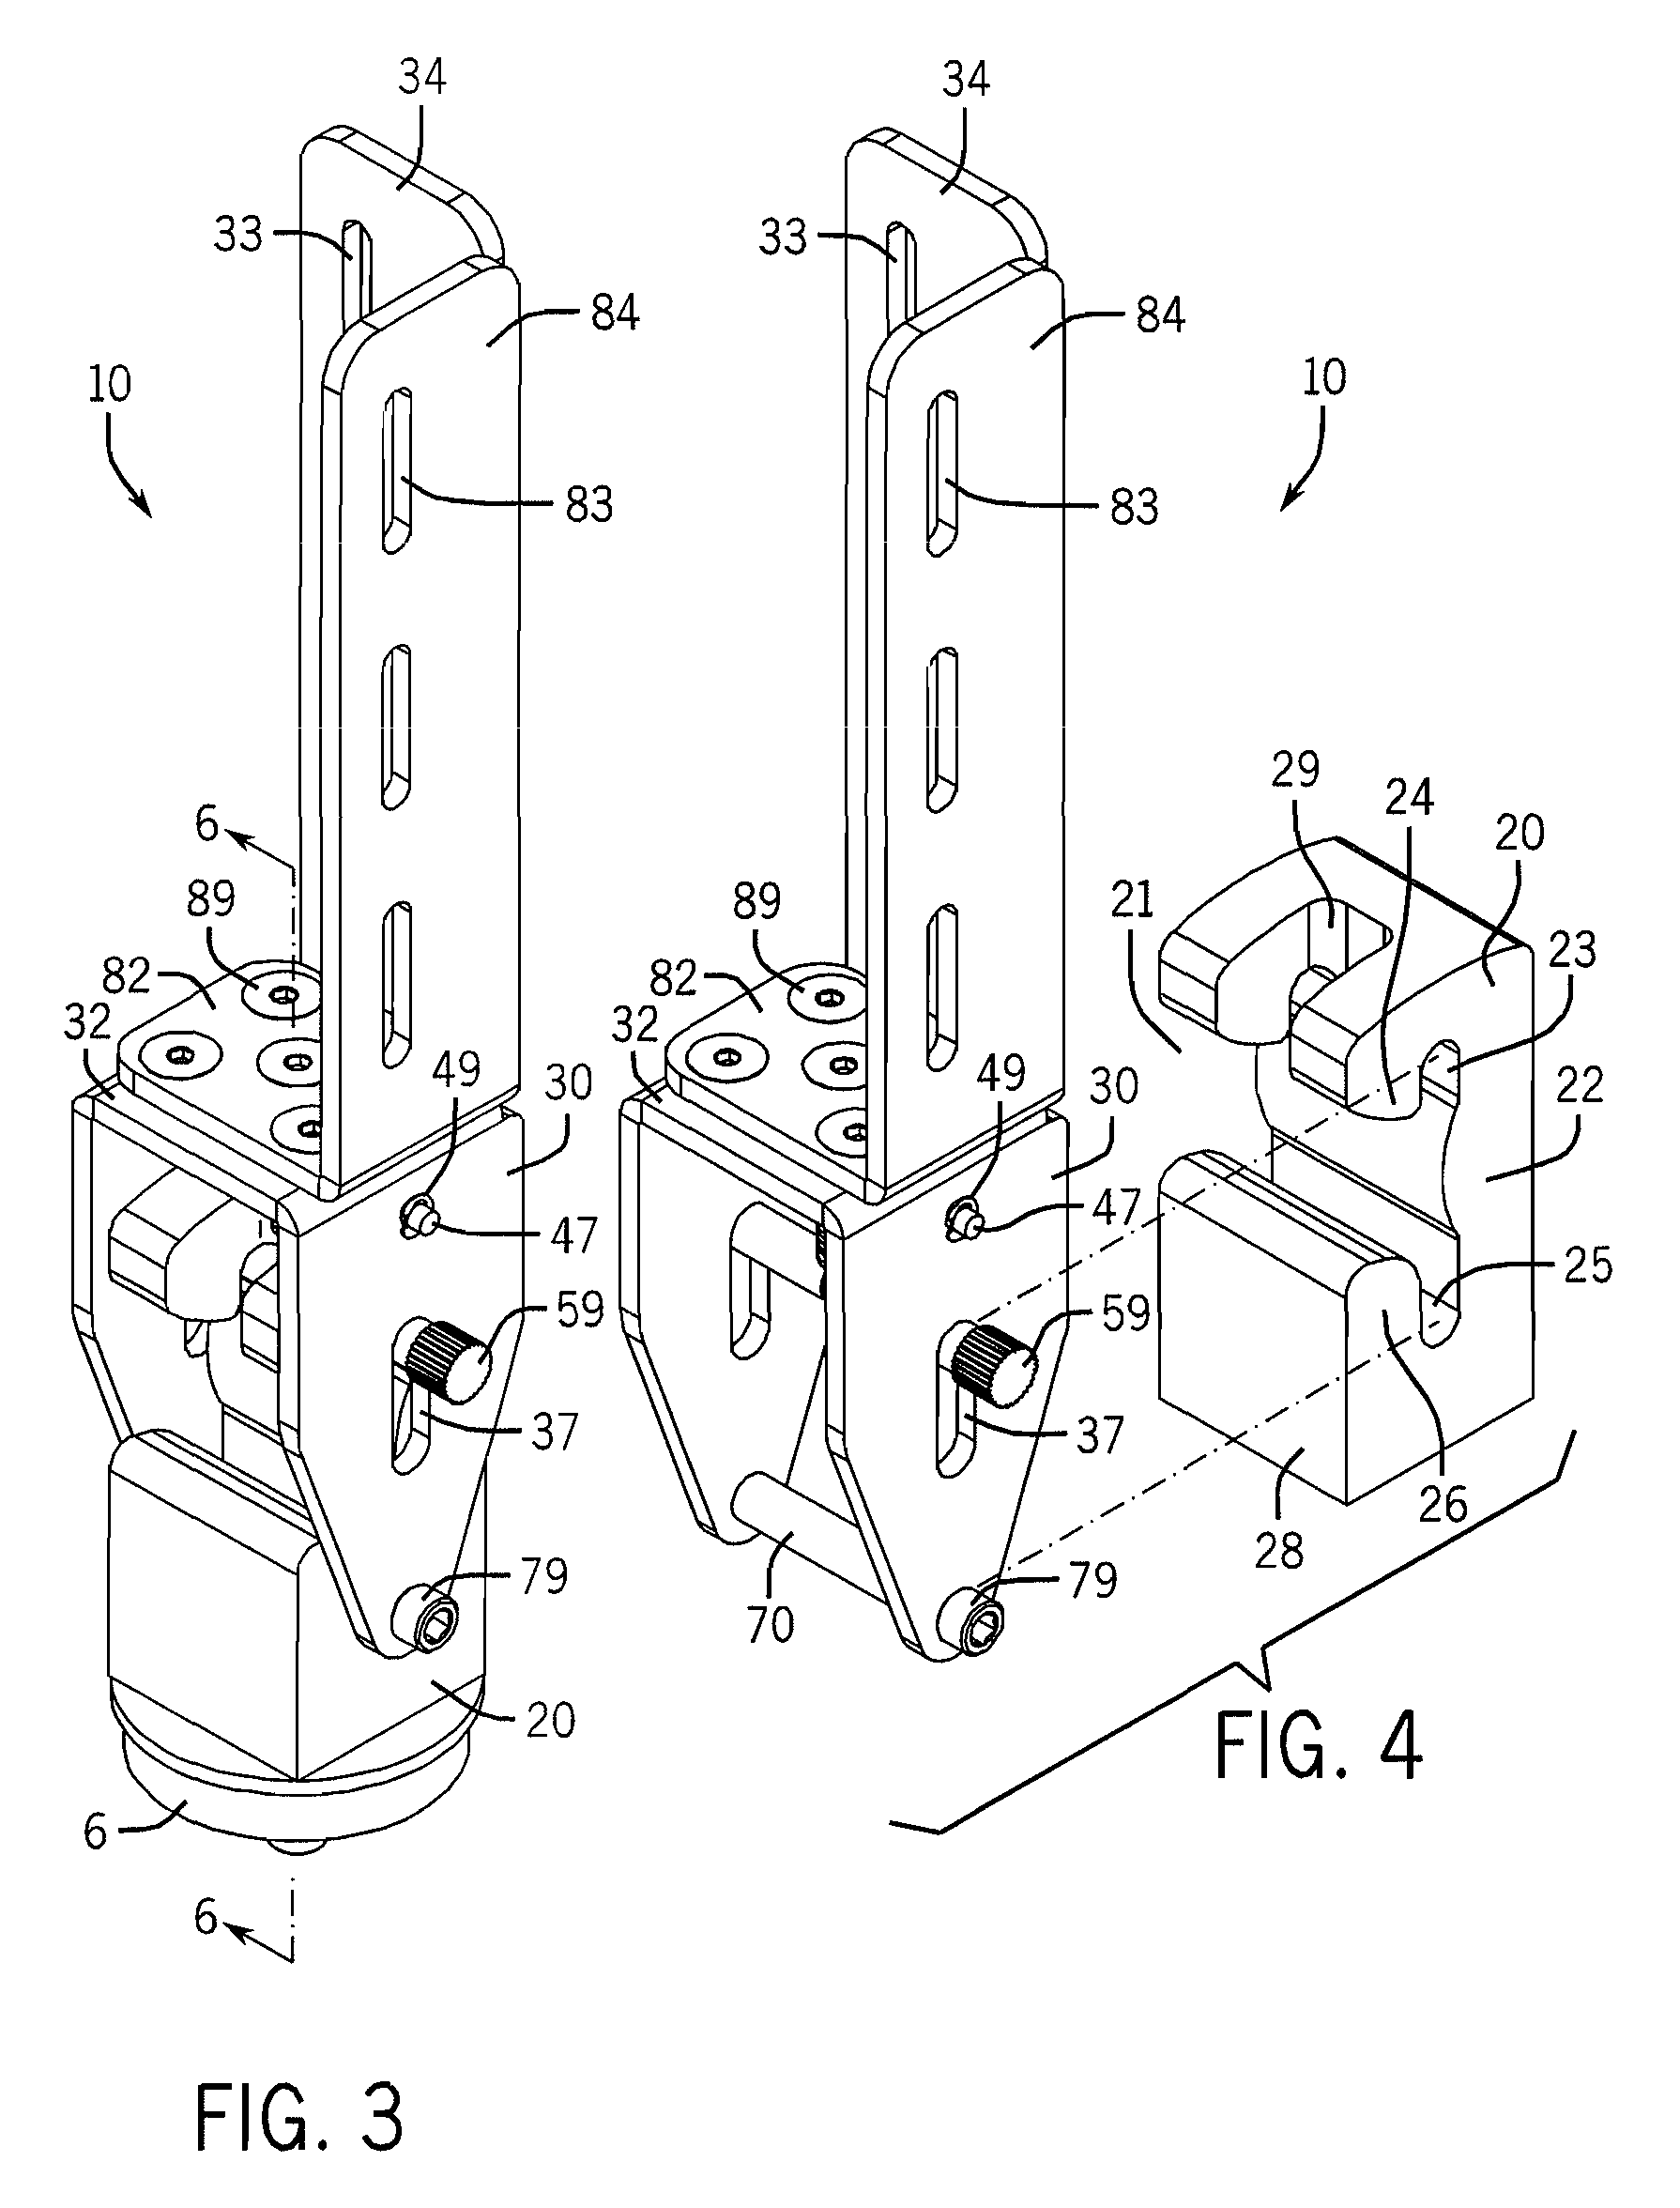 Saddle coupling and saddle base assembly for use with power hand tools